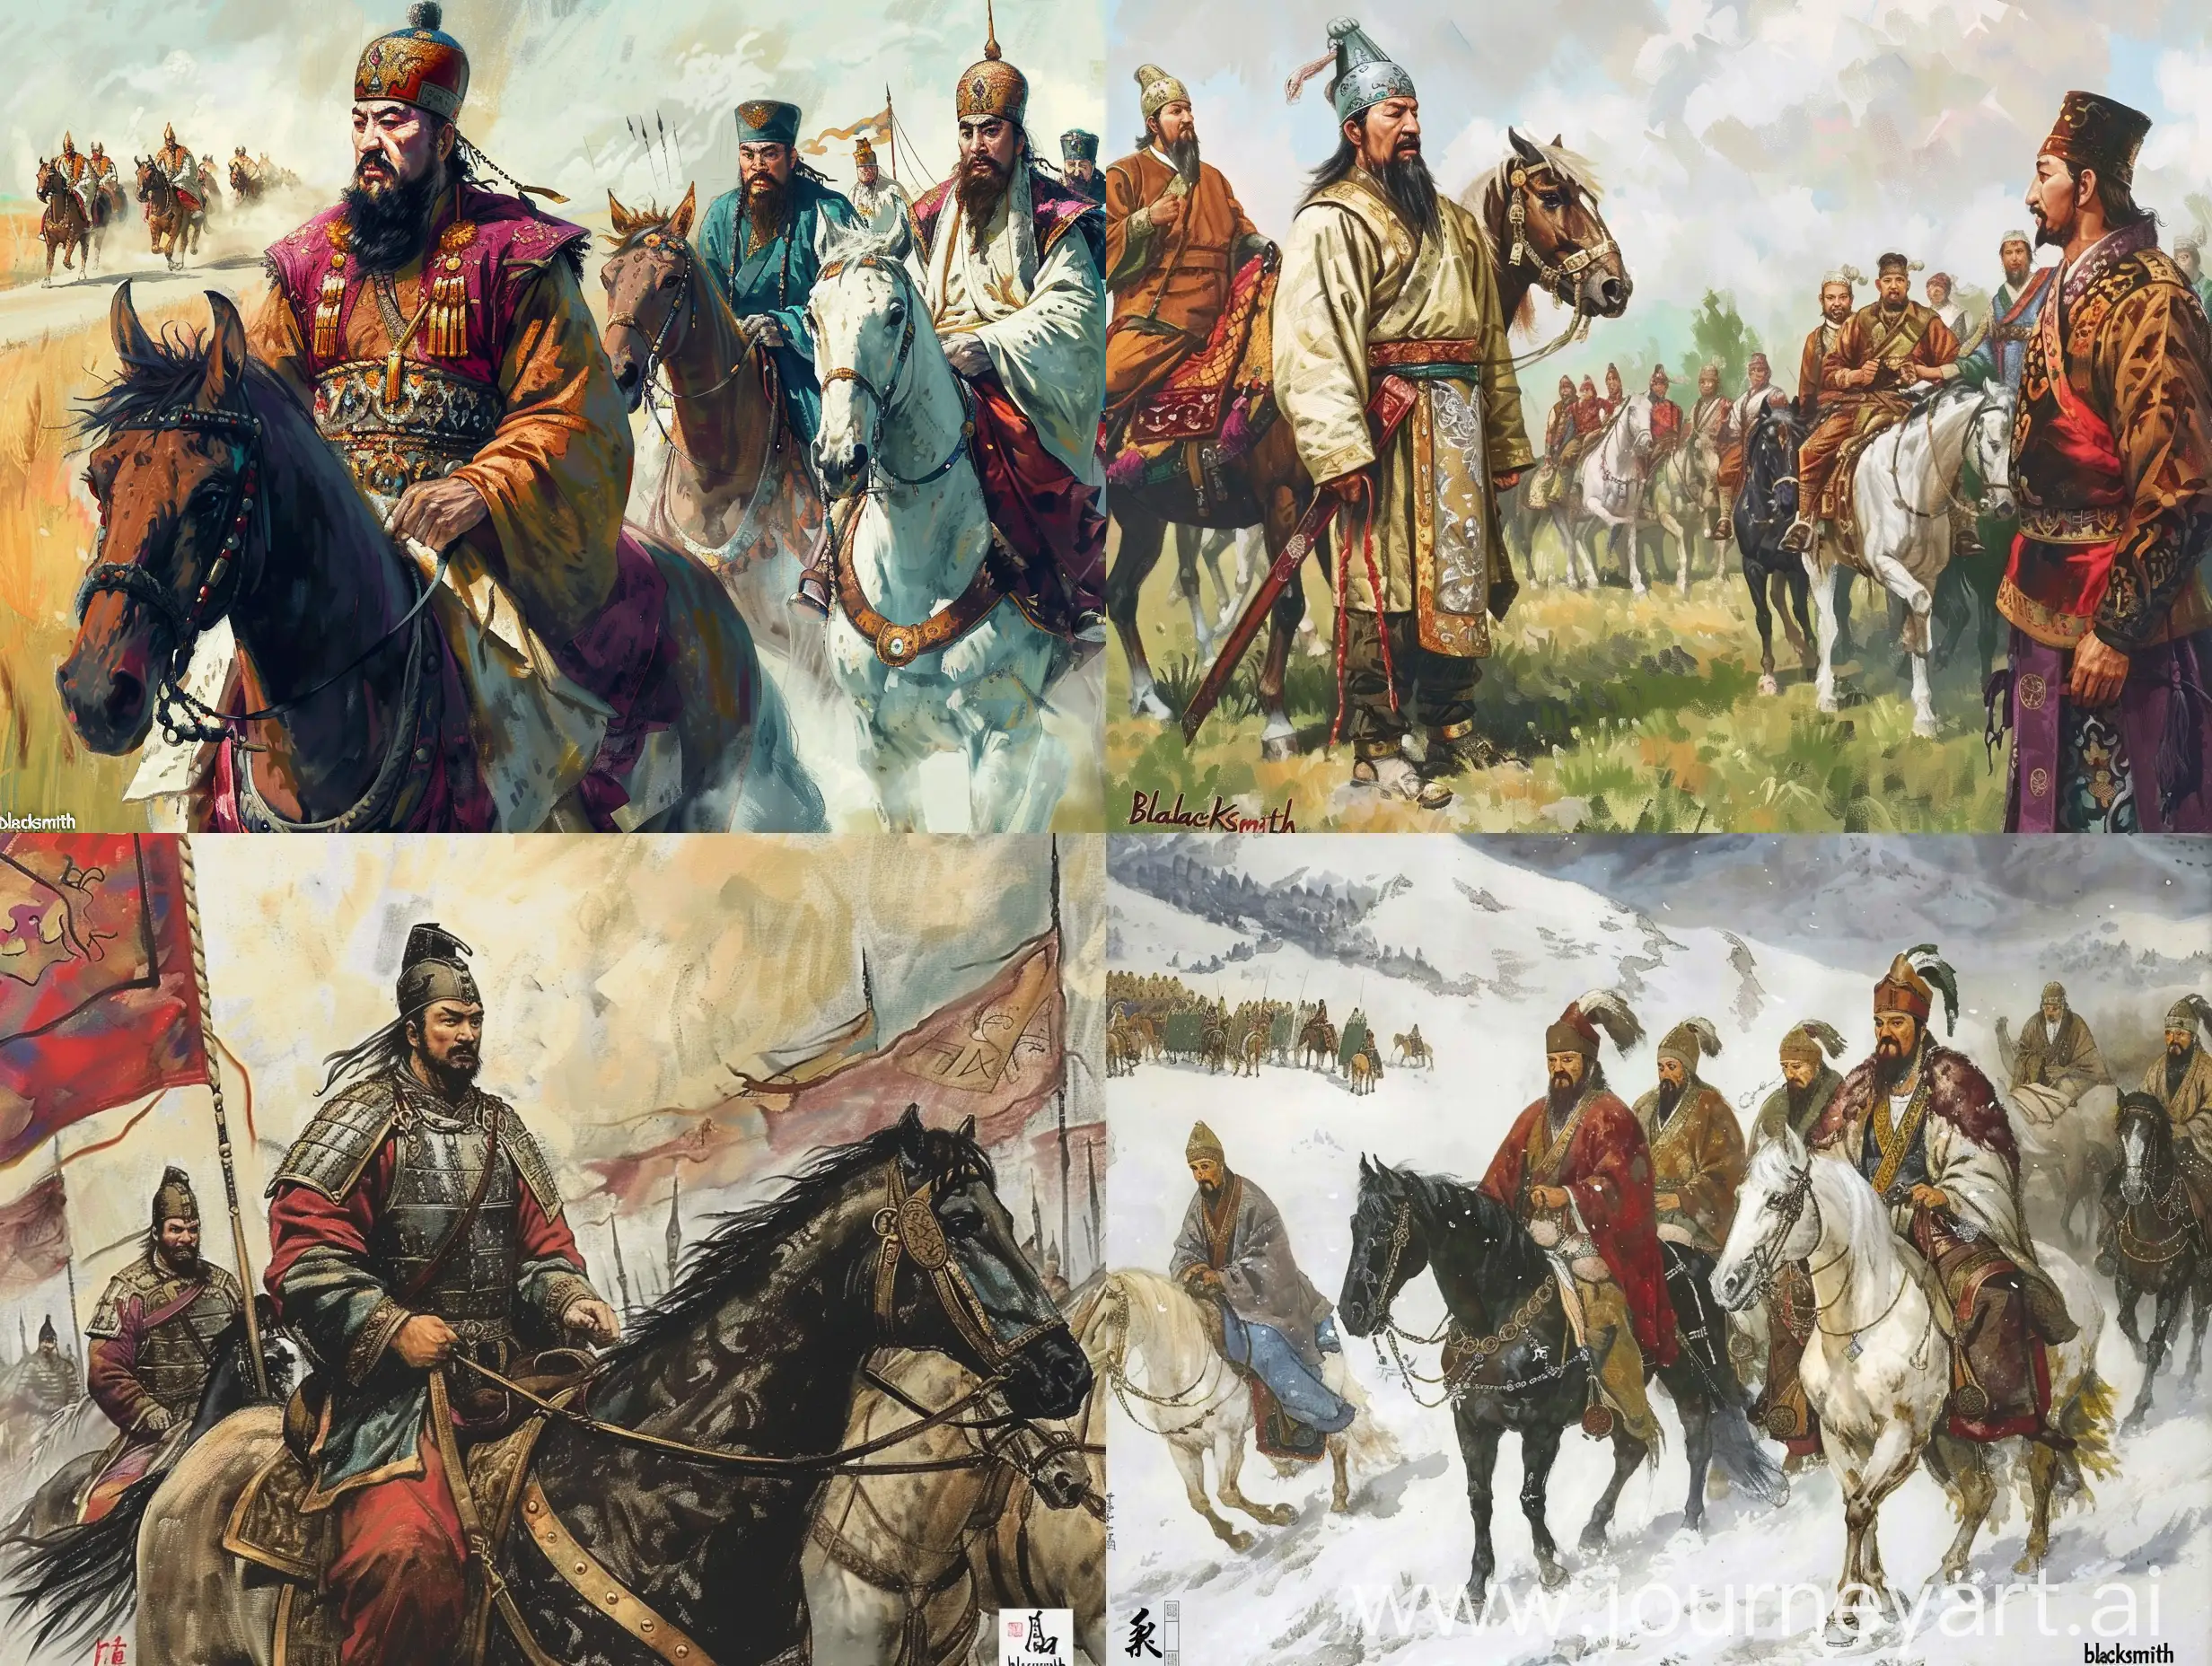 According to the History of the Turkic Northern Dynasties, Bumin's tribe began to grow stronger in 545 and frequently invaded Wei's western border. Wei's chancellor sent an envoy, An Nuopanto, to establish trade relations with the Göktürk leader Bumin. Bumin paid tribute to Western Wei in 546 and in the same year suppressed a rebellion against the Rouran Khaganate, the Tiele tribe. Later, Bumin wanted to ask the Rouran Khaganate for a princess, but the Rouran Khan Anagui refused and insulted him. Bumin was enraged and killed Anagui's envoy, severing relations with the Rouran Khaganate. Anagui's insult of “blacksmith” was recorded in the Chinese chronicles, and some sources noted that the Turks were blacksmiths for the Rouran elite and that this insult could imply a form of vassalage in Rouran society. Following this, Bumin emerged as the leader of the rebellion against the Rouran.